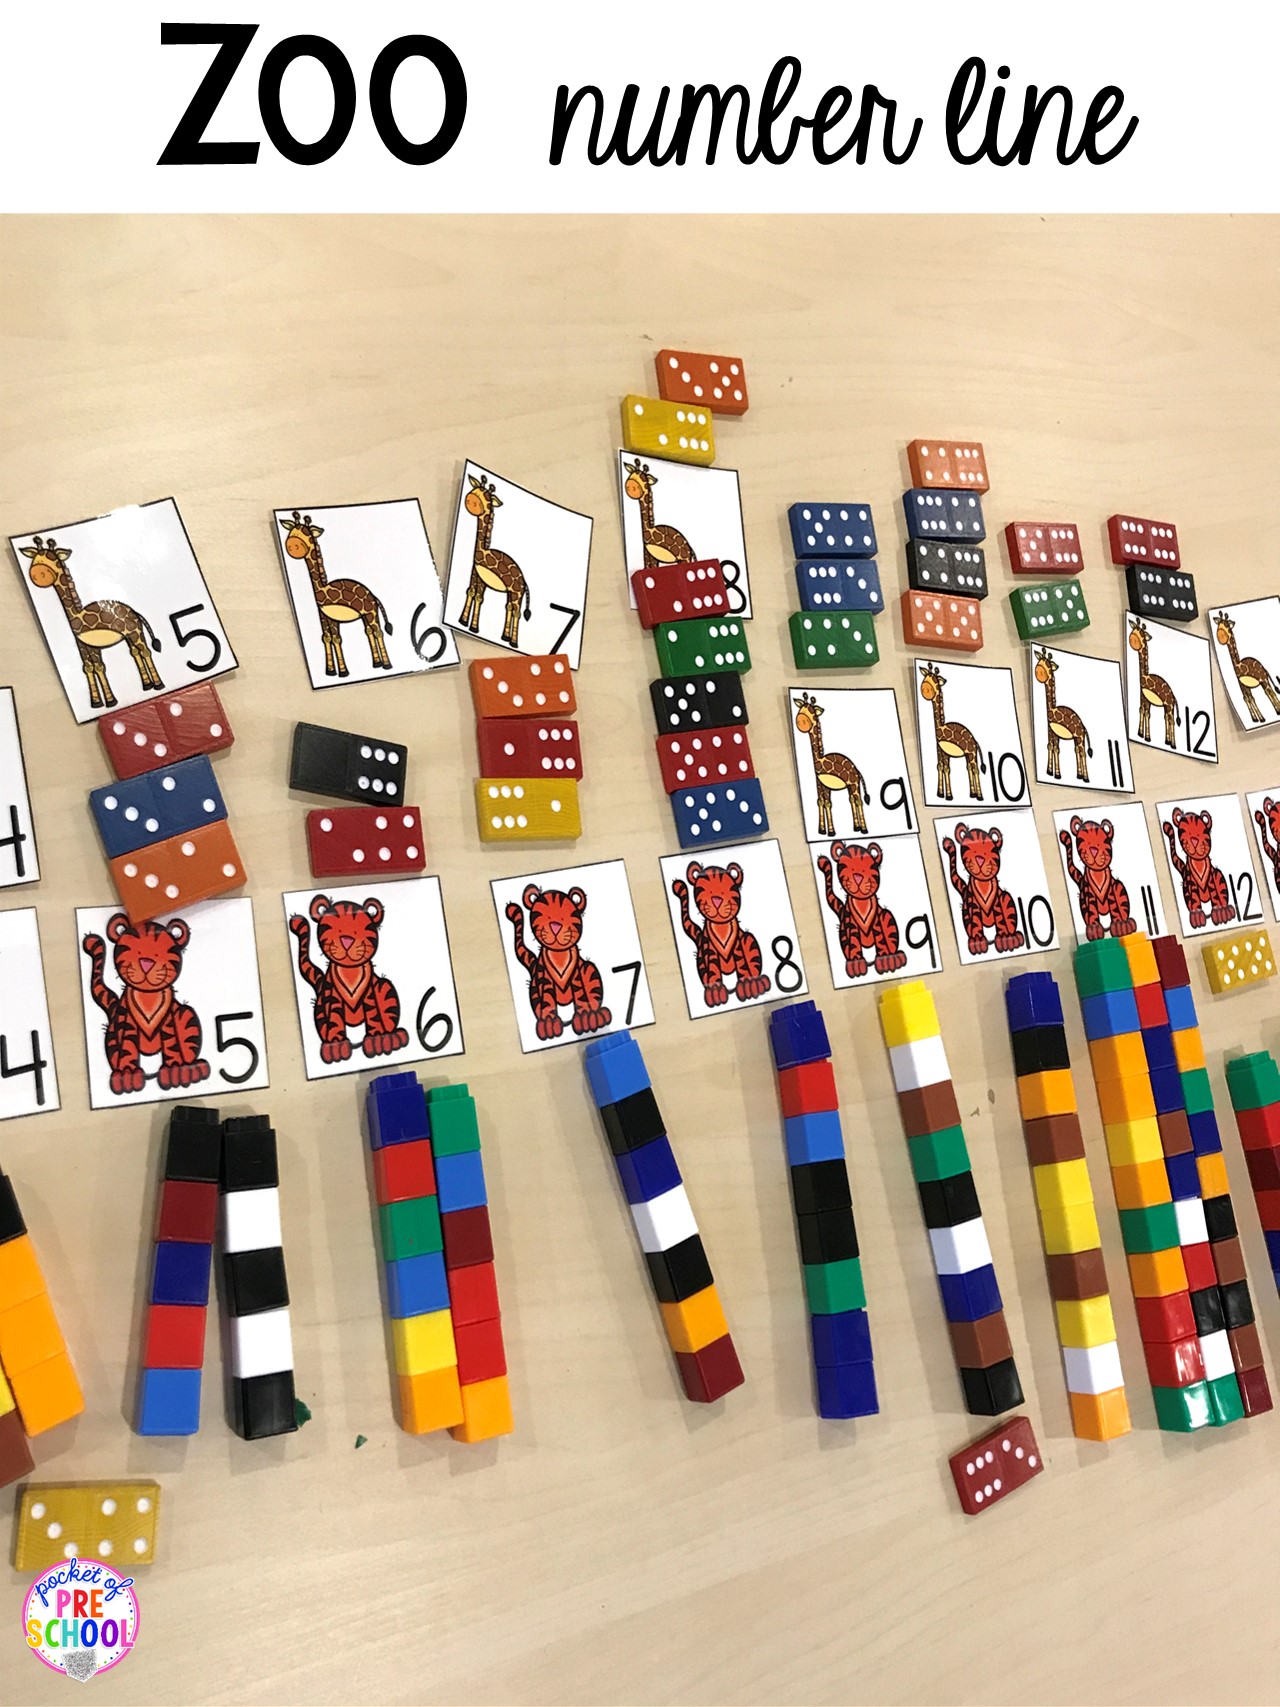 Zoo number line with math manipulatives and animal number cards for a zoo them to practice number identification and counting. #zootheme #preschool #prek